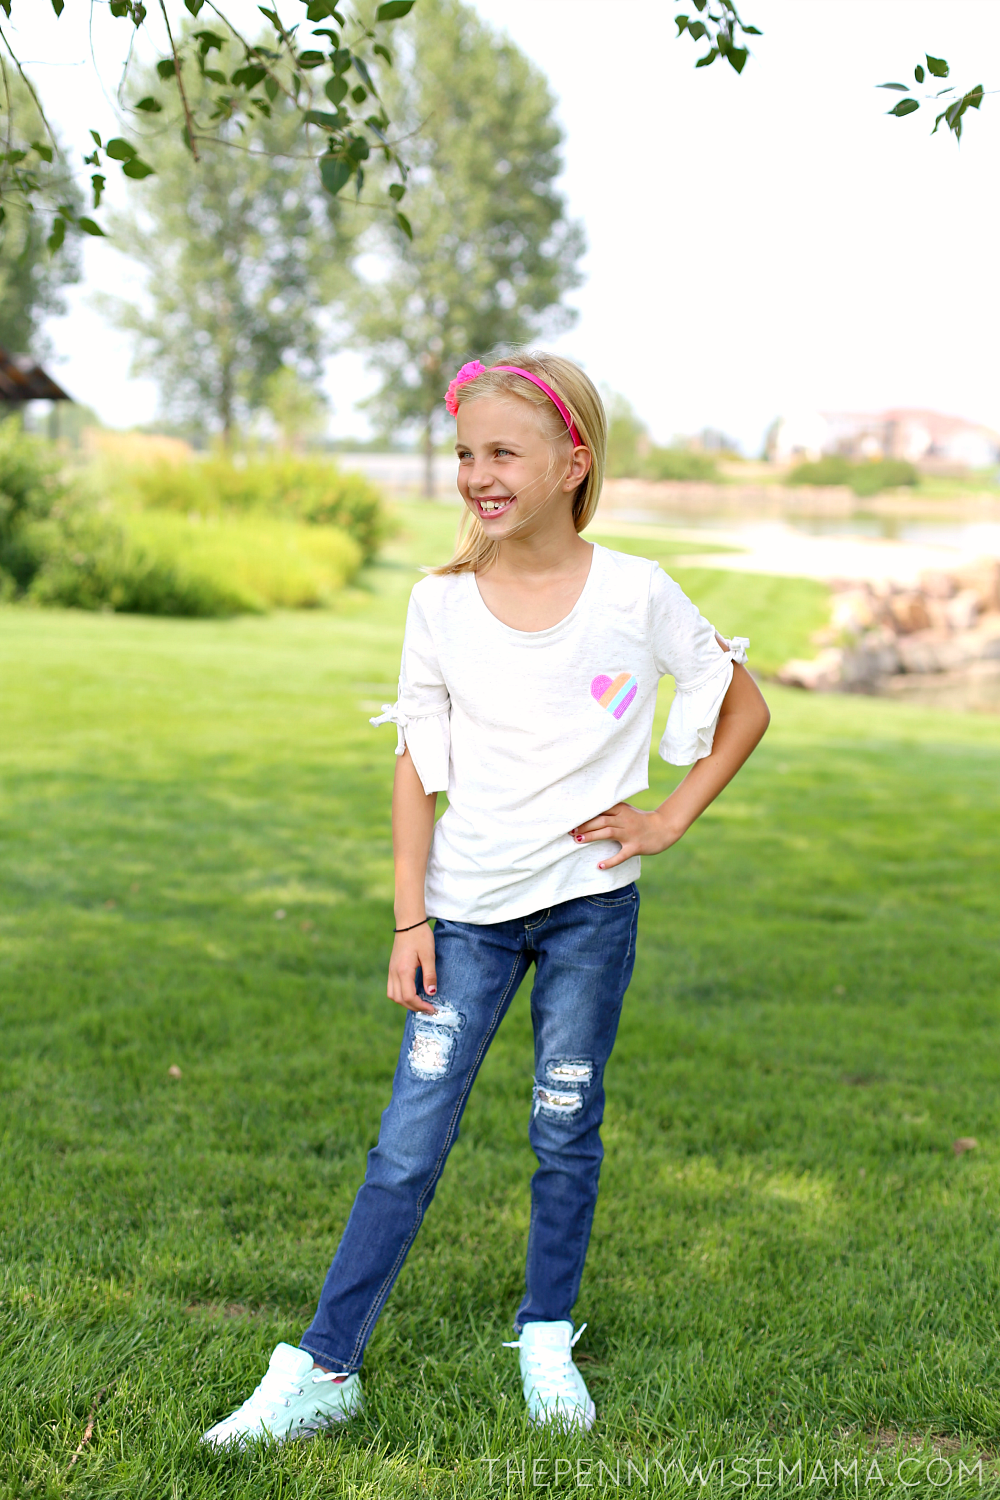 Save Big on Kohl's Back-to-School Styles